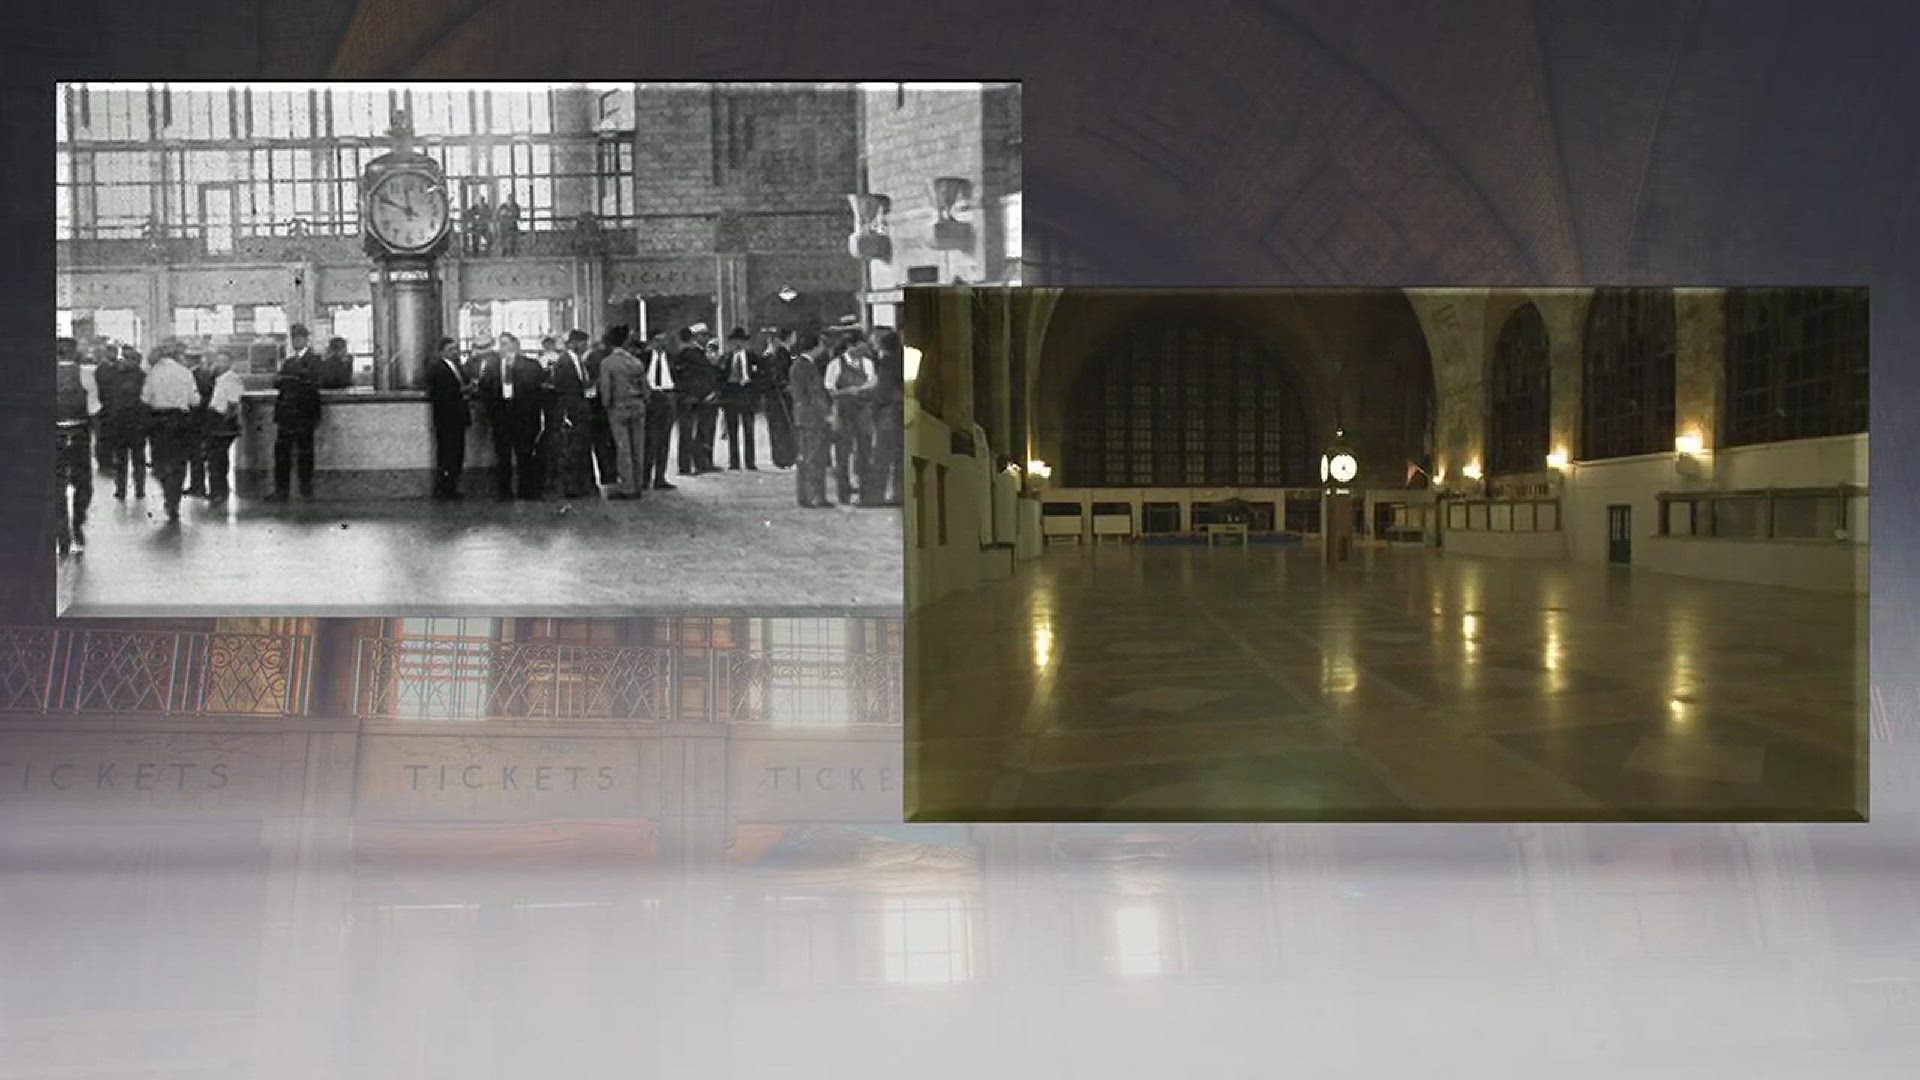 Melissa Holmes gives us an exclusive inside look of the Central Terminal